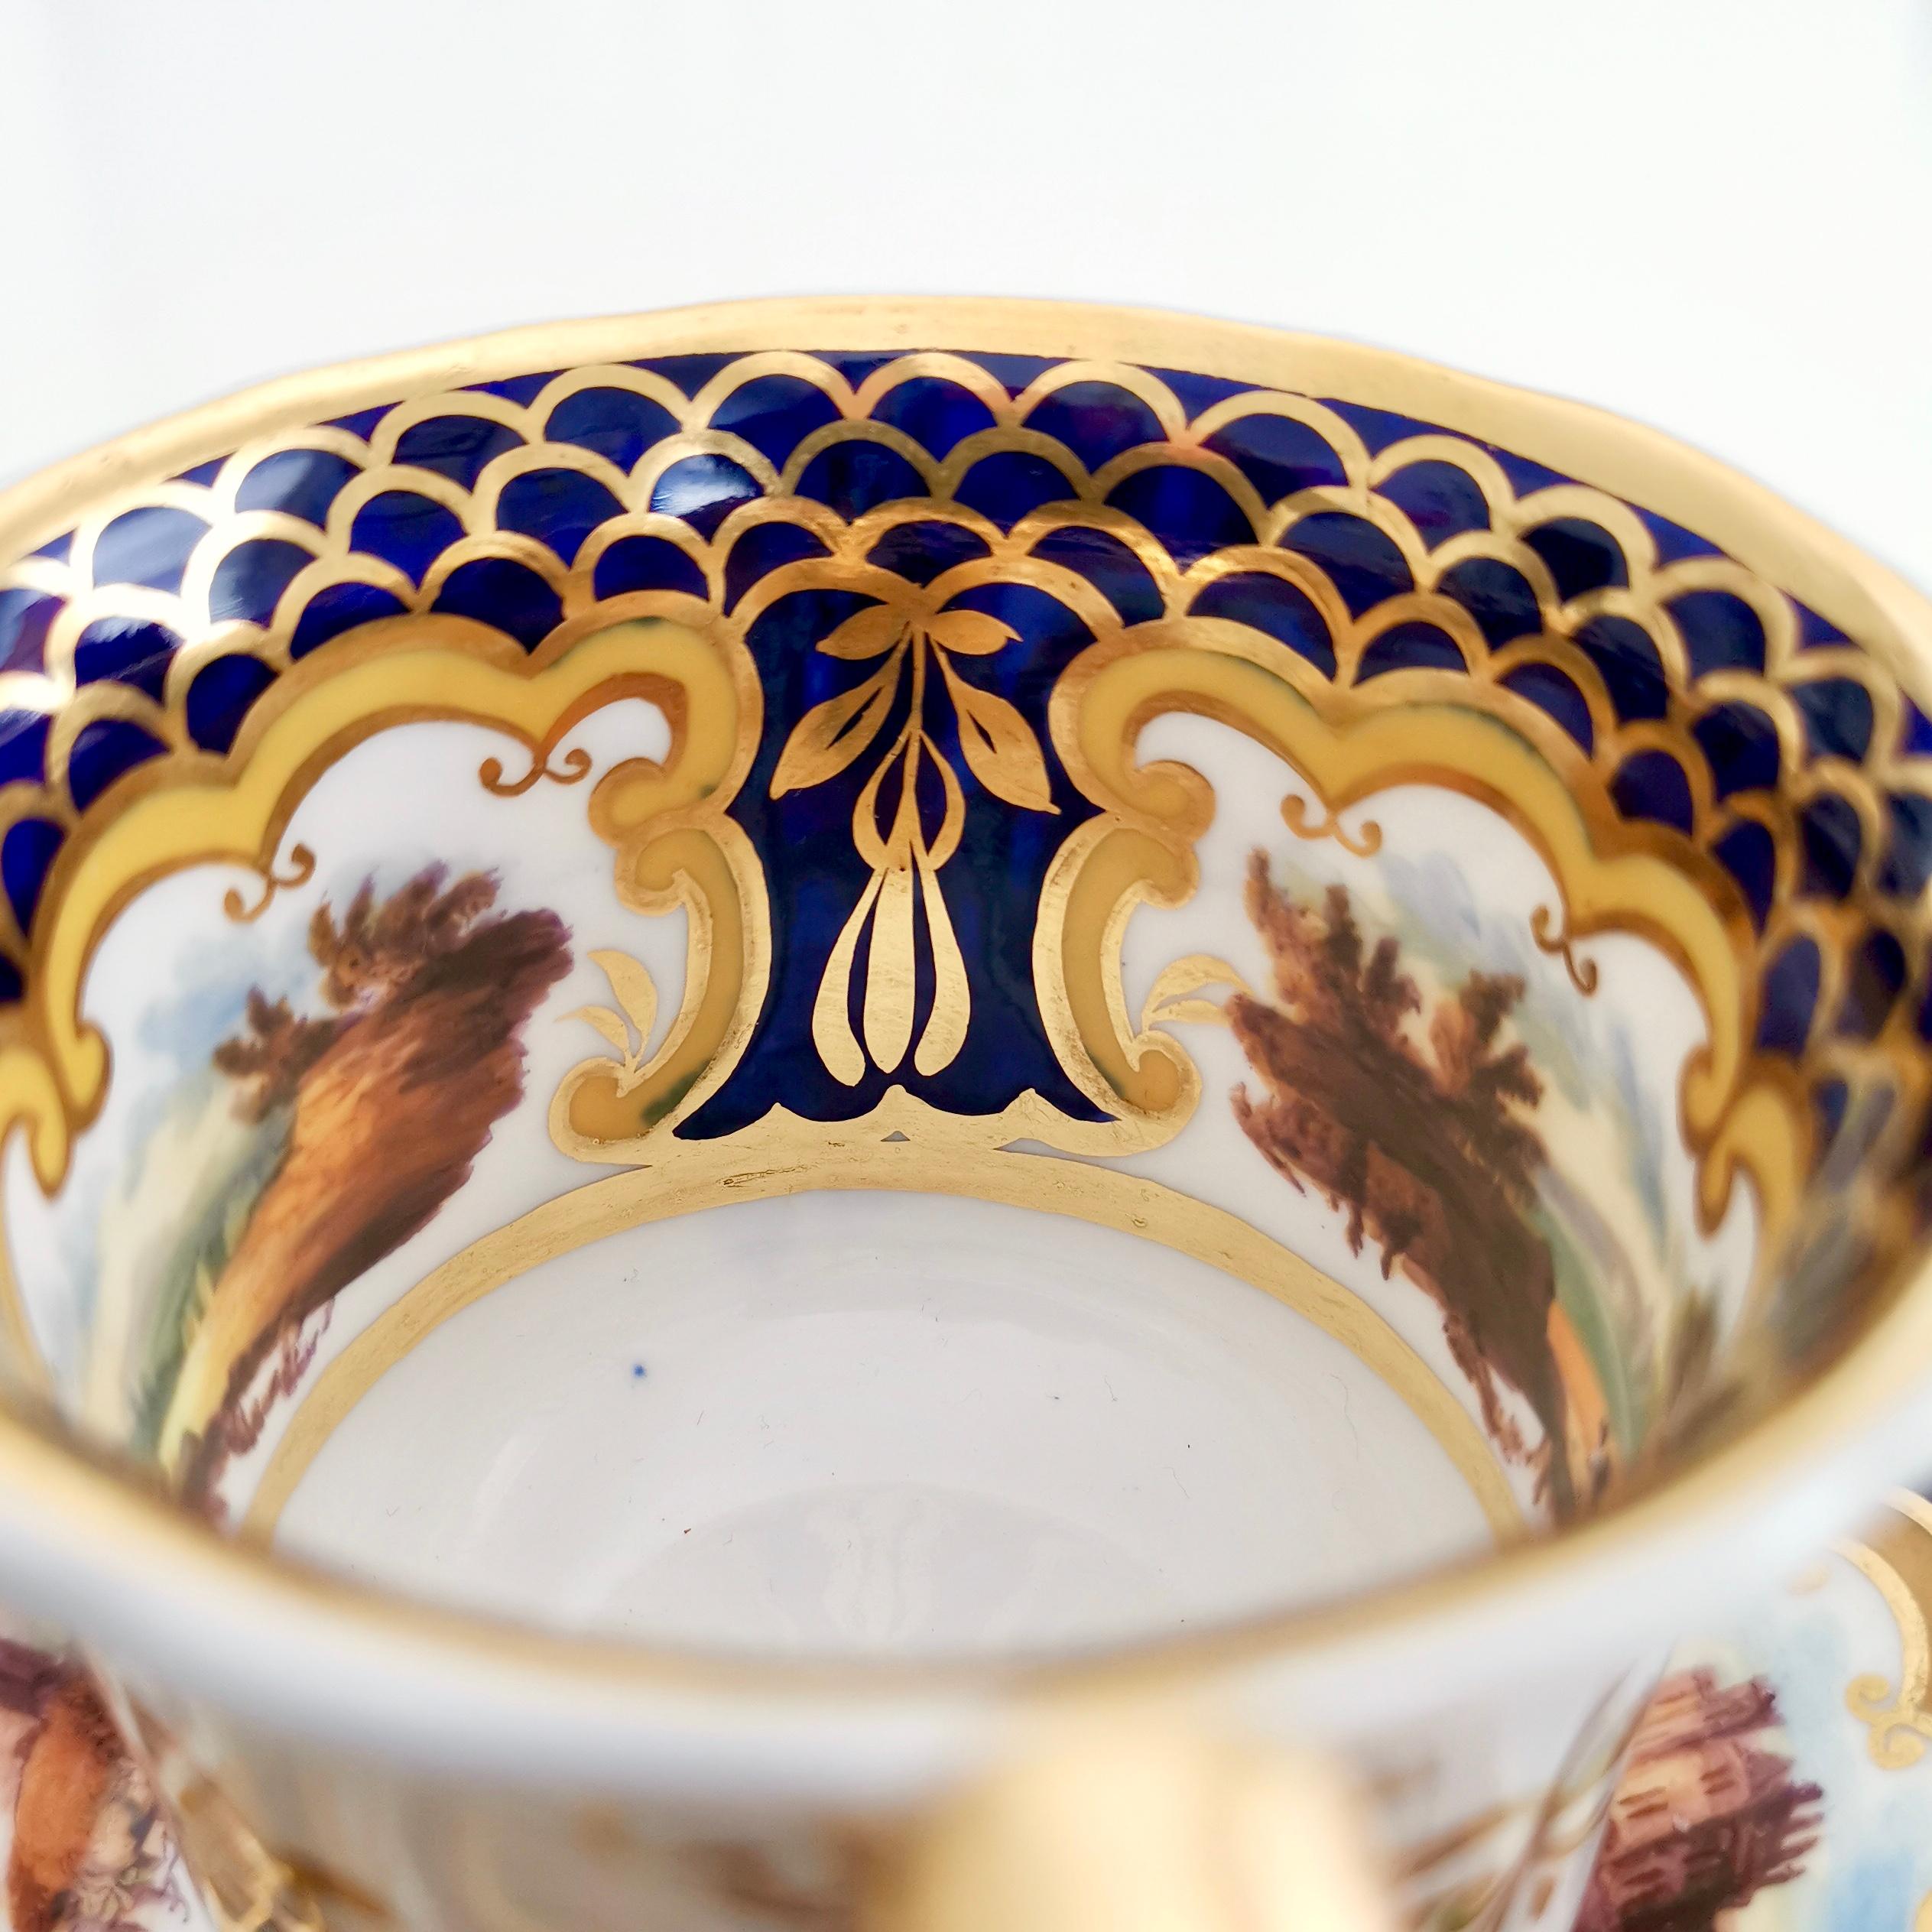 Rare Ridgway Coffee Cup, Cobalt Blue, Gilt and Sublime Landscapes, circa 1825 7